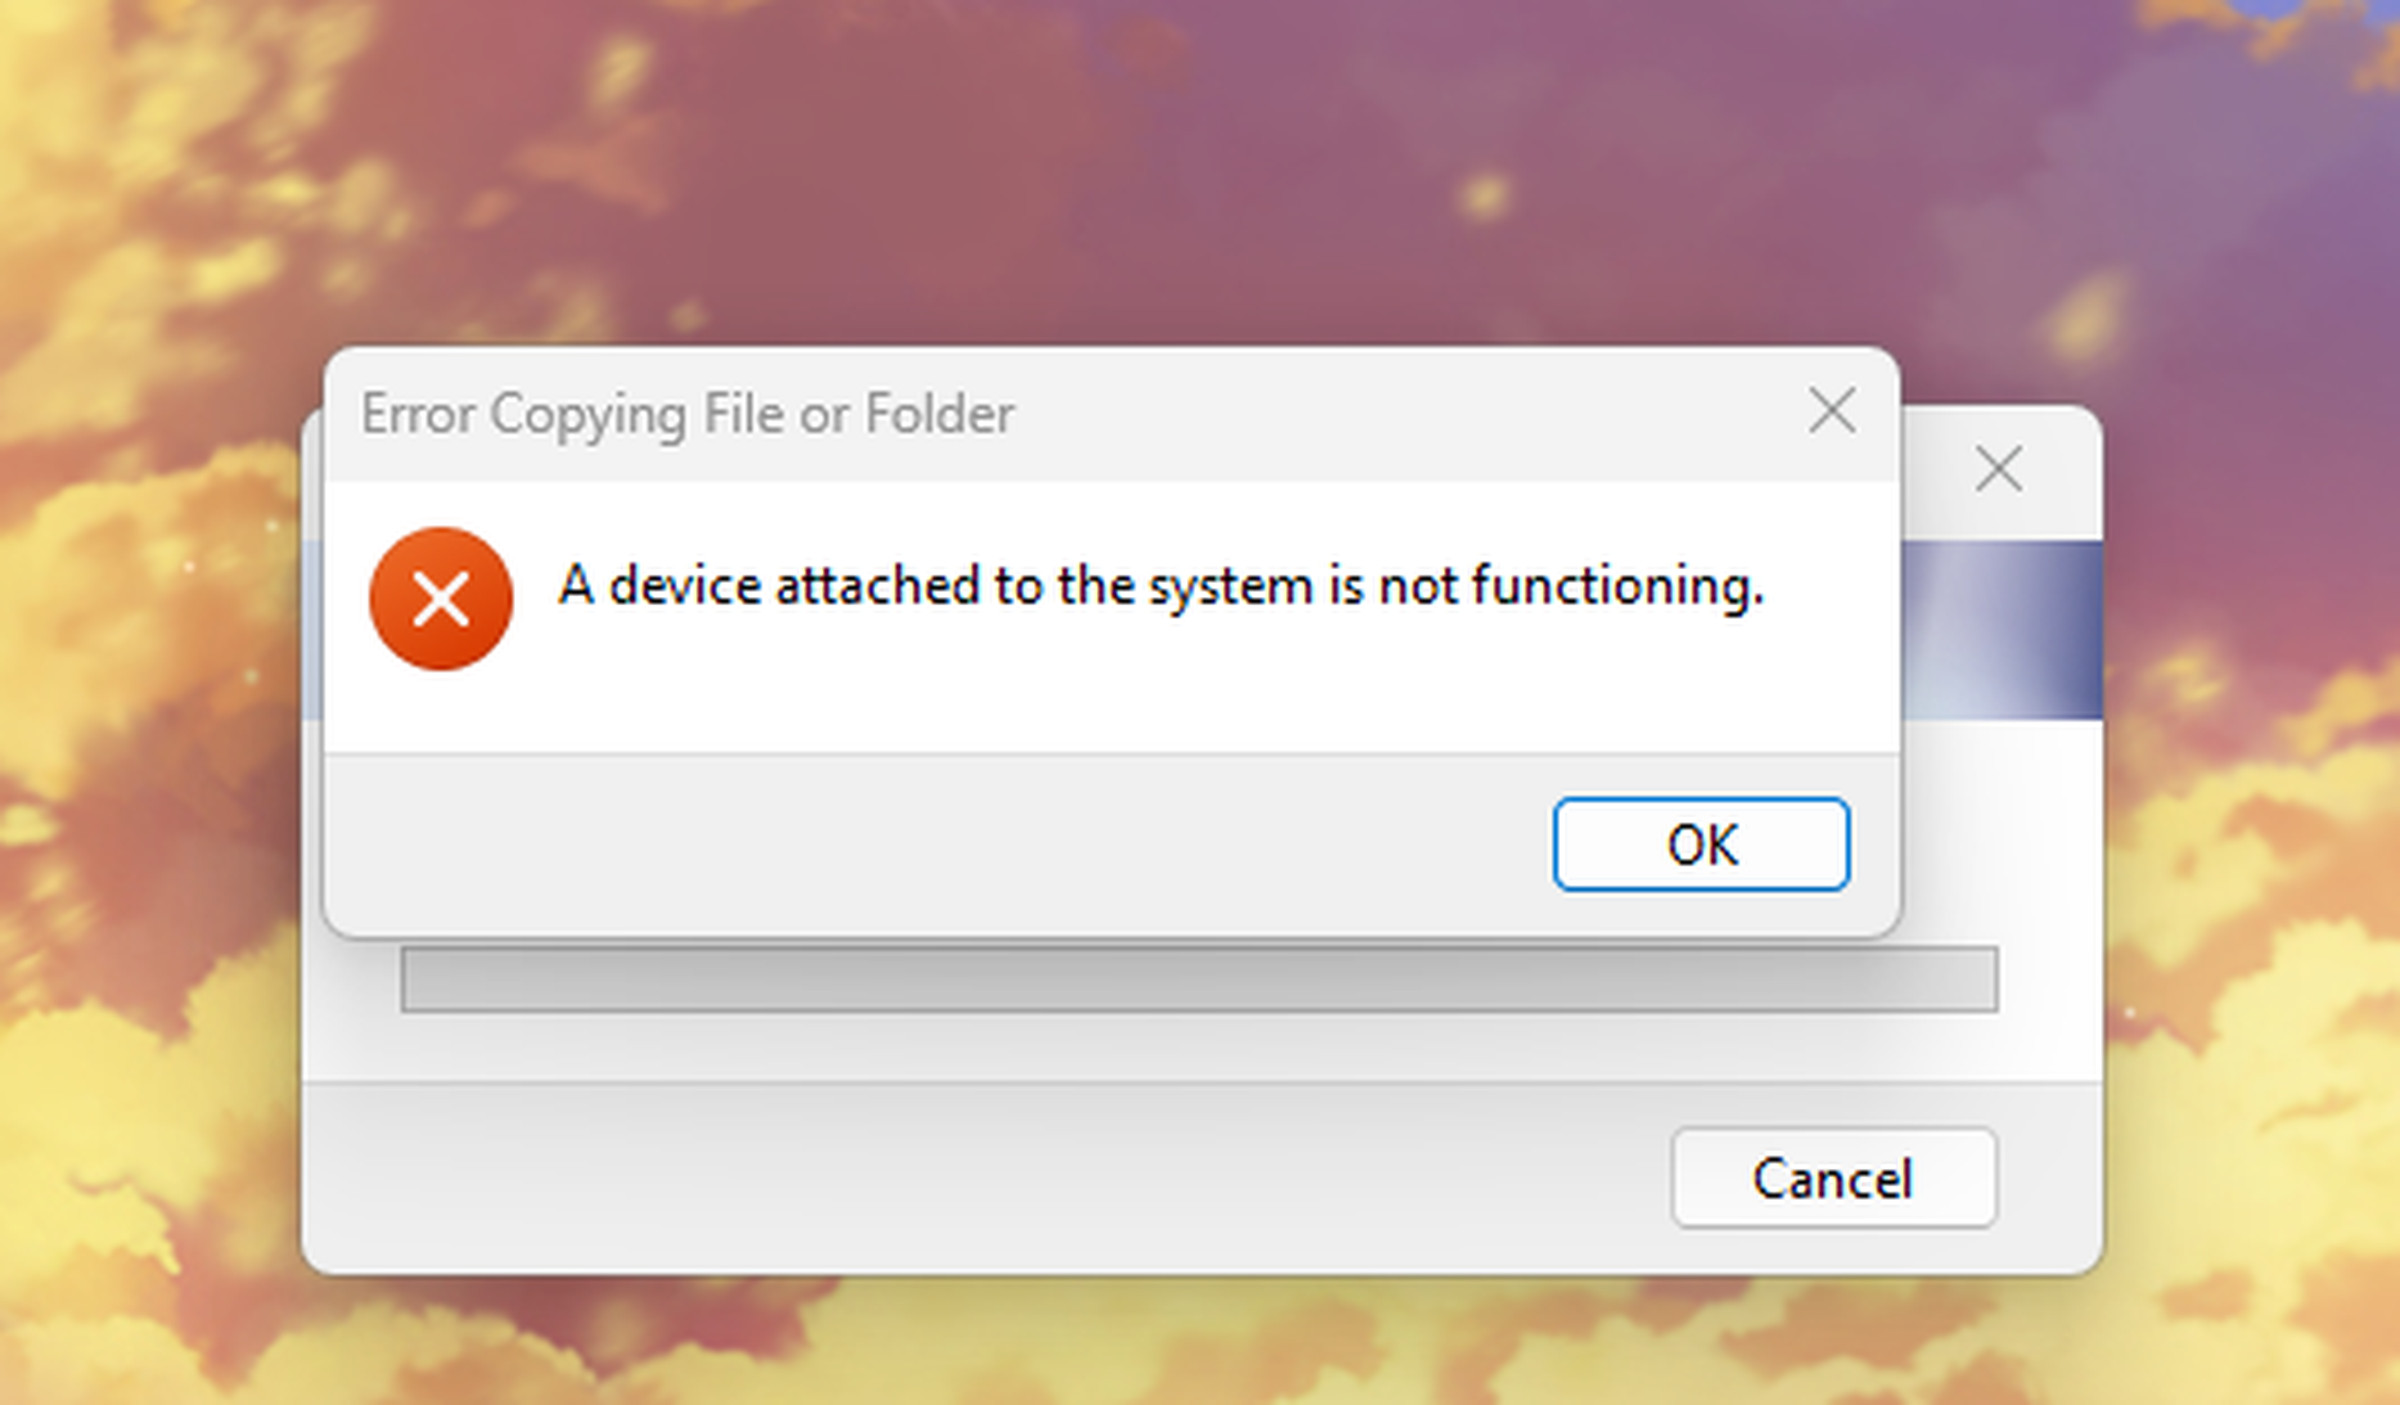 I repeatedly got this “A device attached to the system is not functioning” error on my Windows PC. The iPhone didn’t say anything.